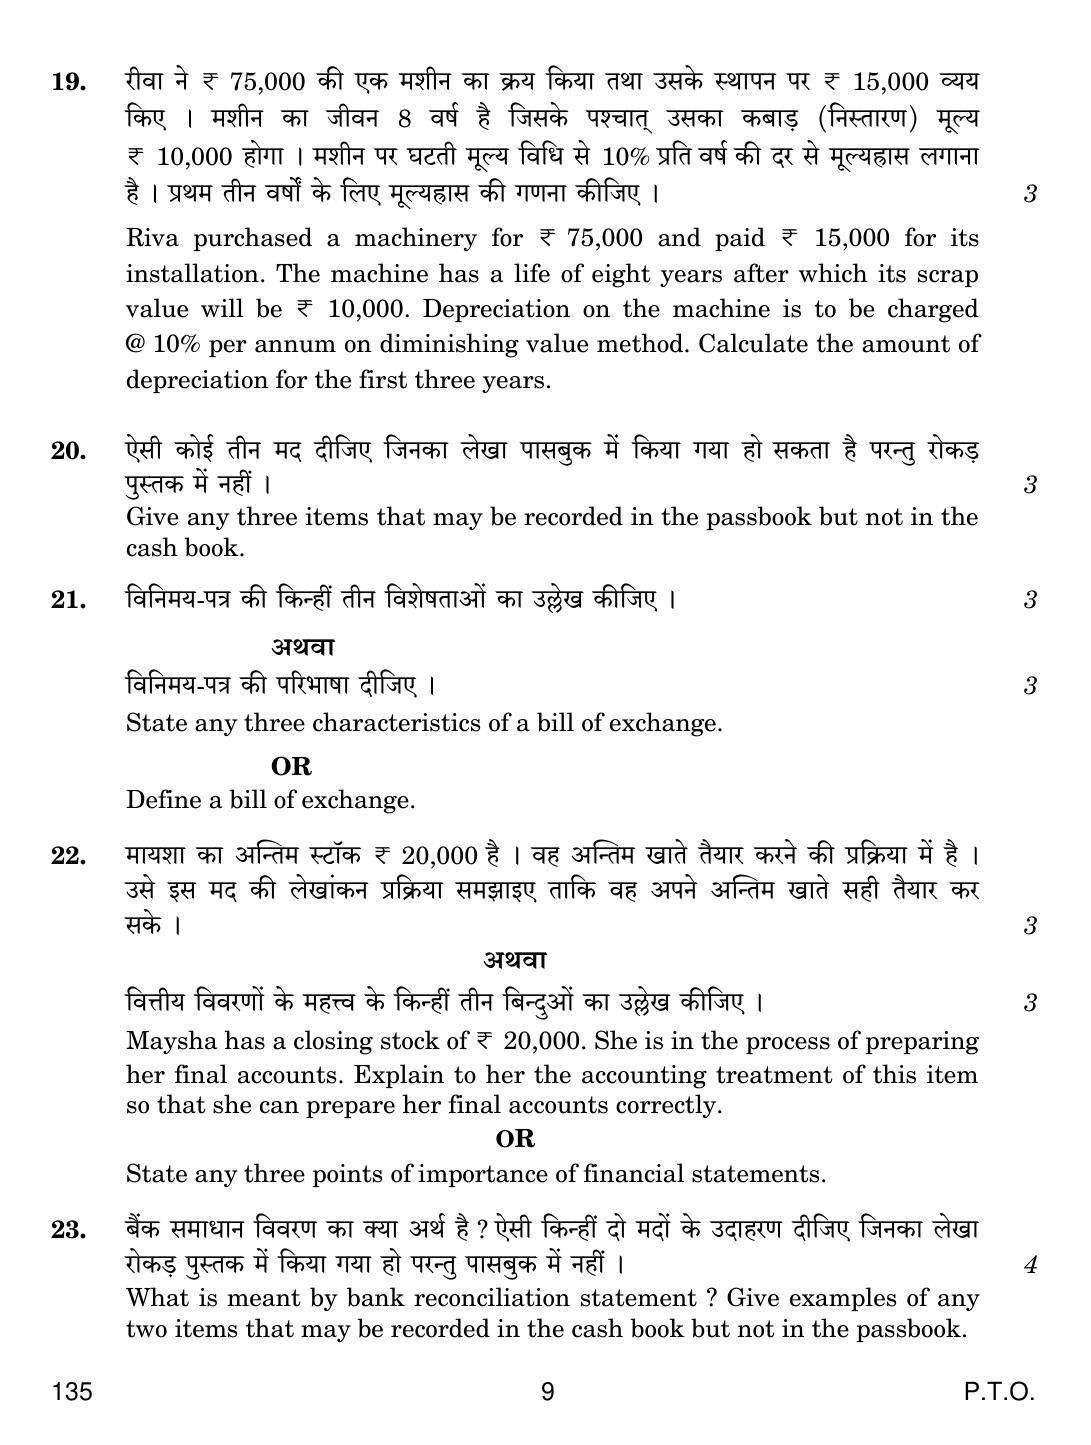 CBSE Class 10 135 ELEMENTS OF BOOK-KEEPING AND ACCOUNTANCY (COMMERCE) 2019 Question Paper - Page 9